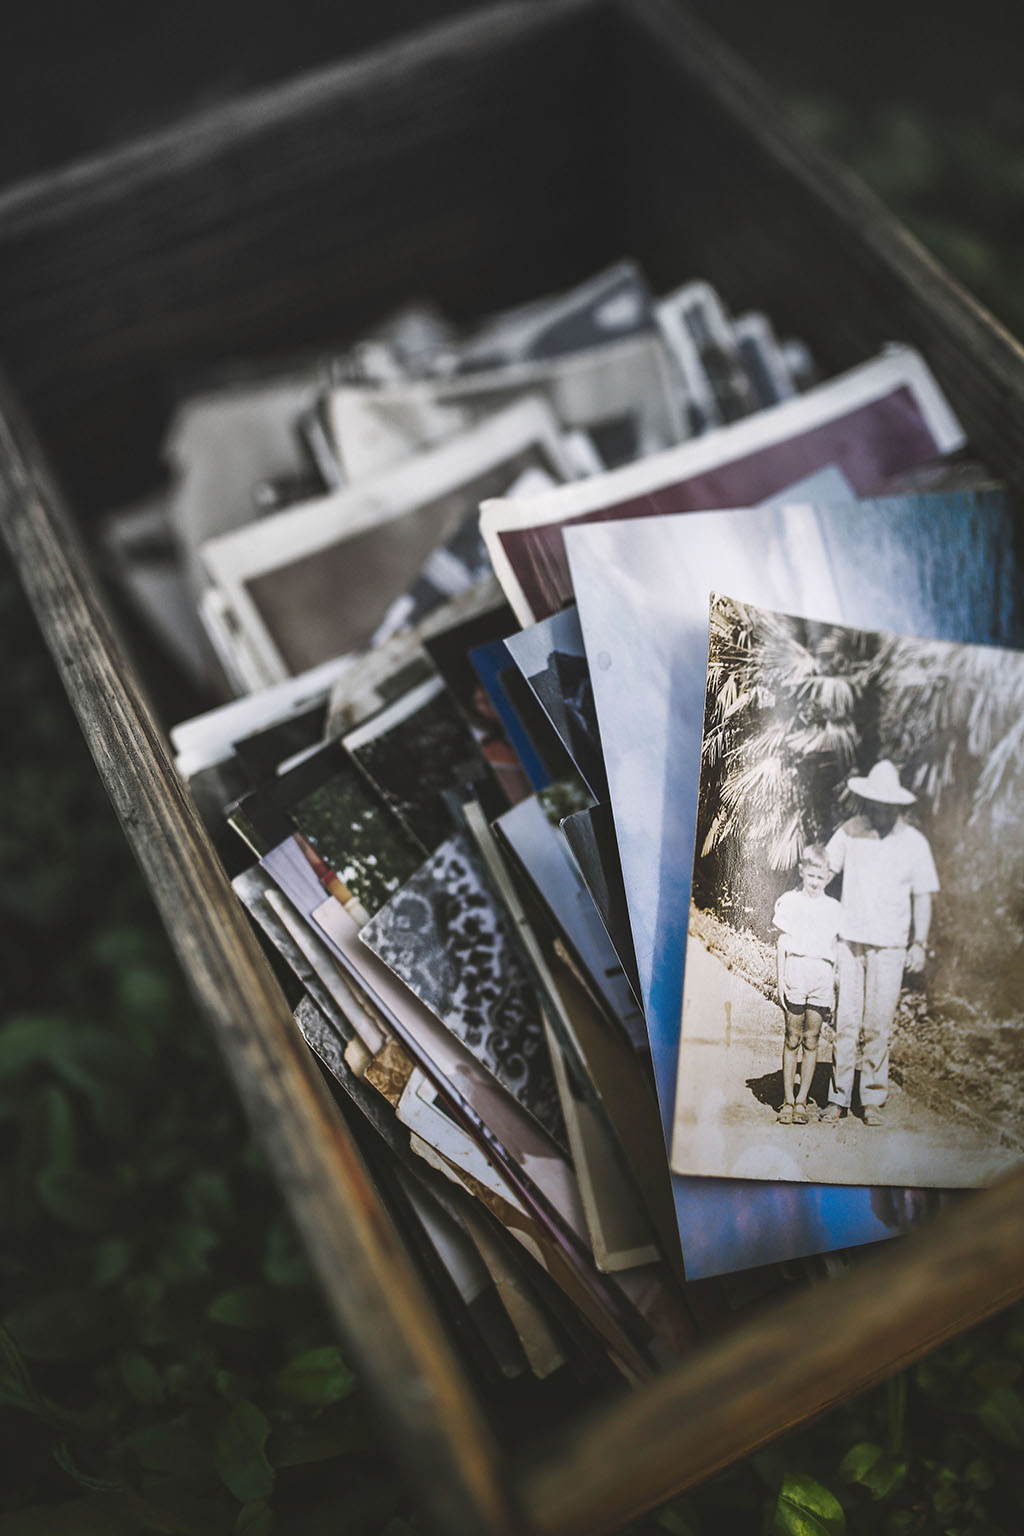 PHOTO: This is a box of photographs. Image courtesy of Pixel Photographs.